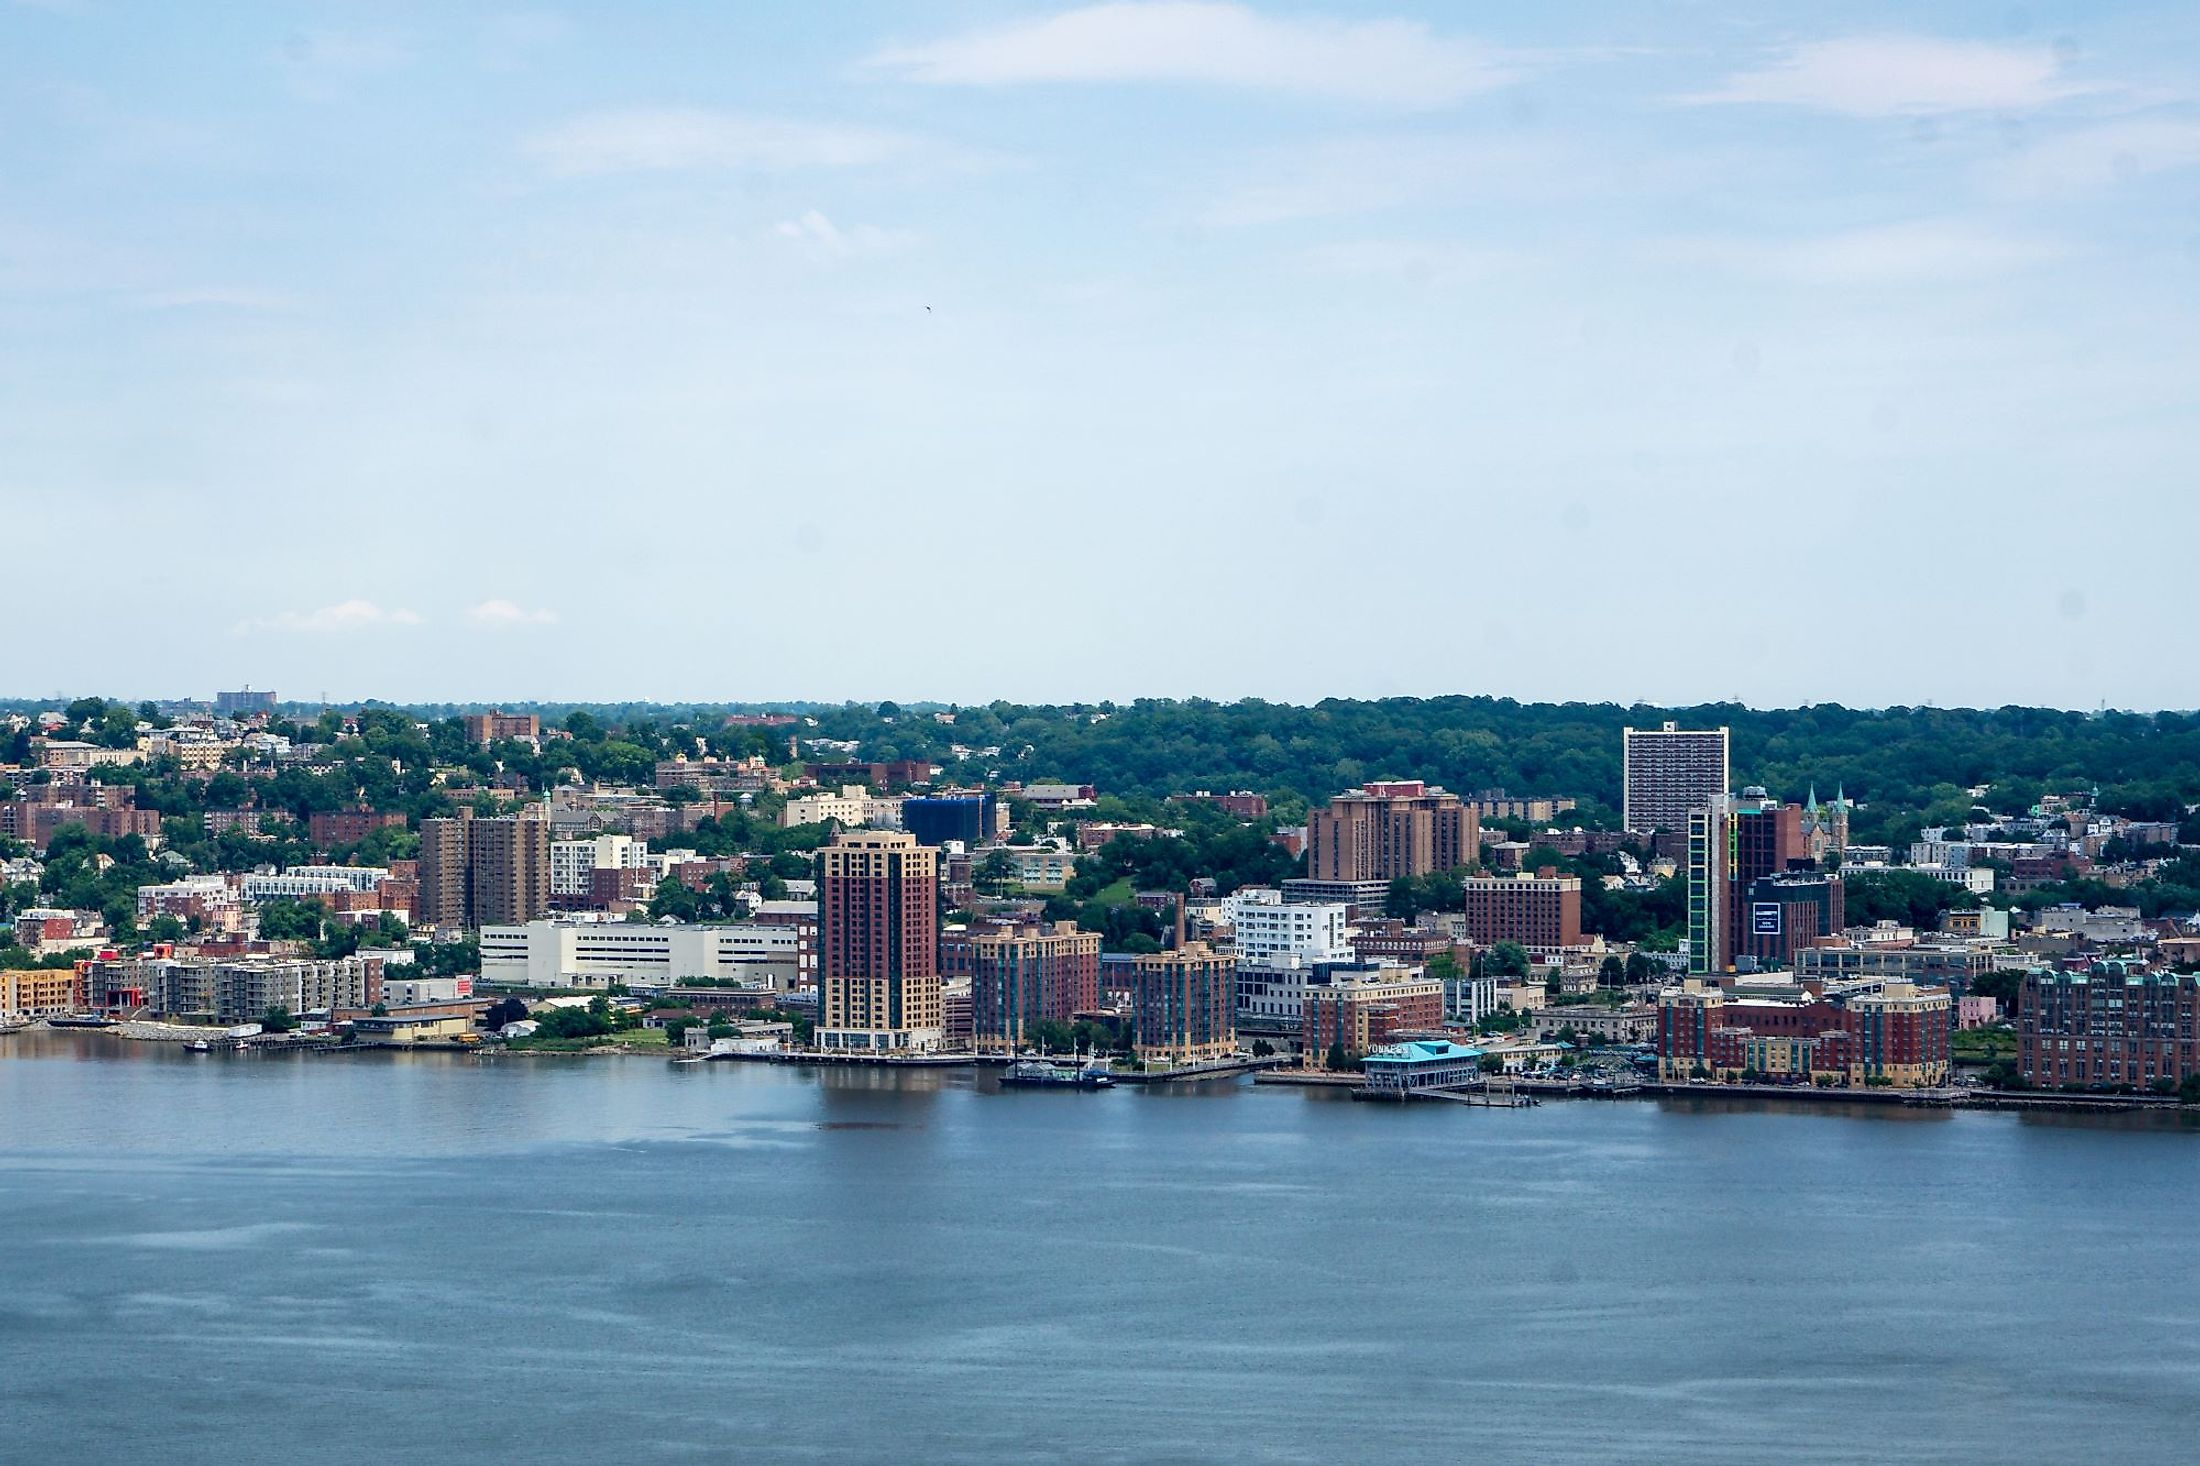 Wide view of the skyline of Yonkers with the Hudson River in the foreground. Editorial credit: Brian Logan Photography / Shutterstock.com